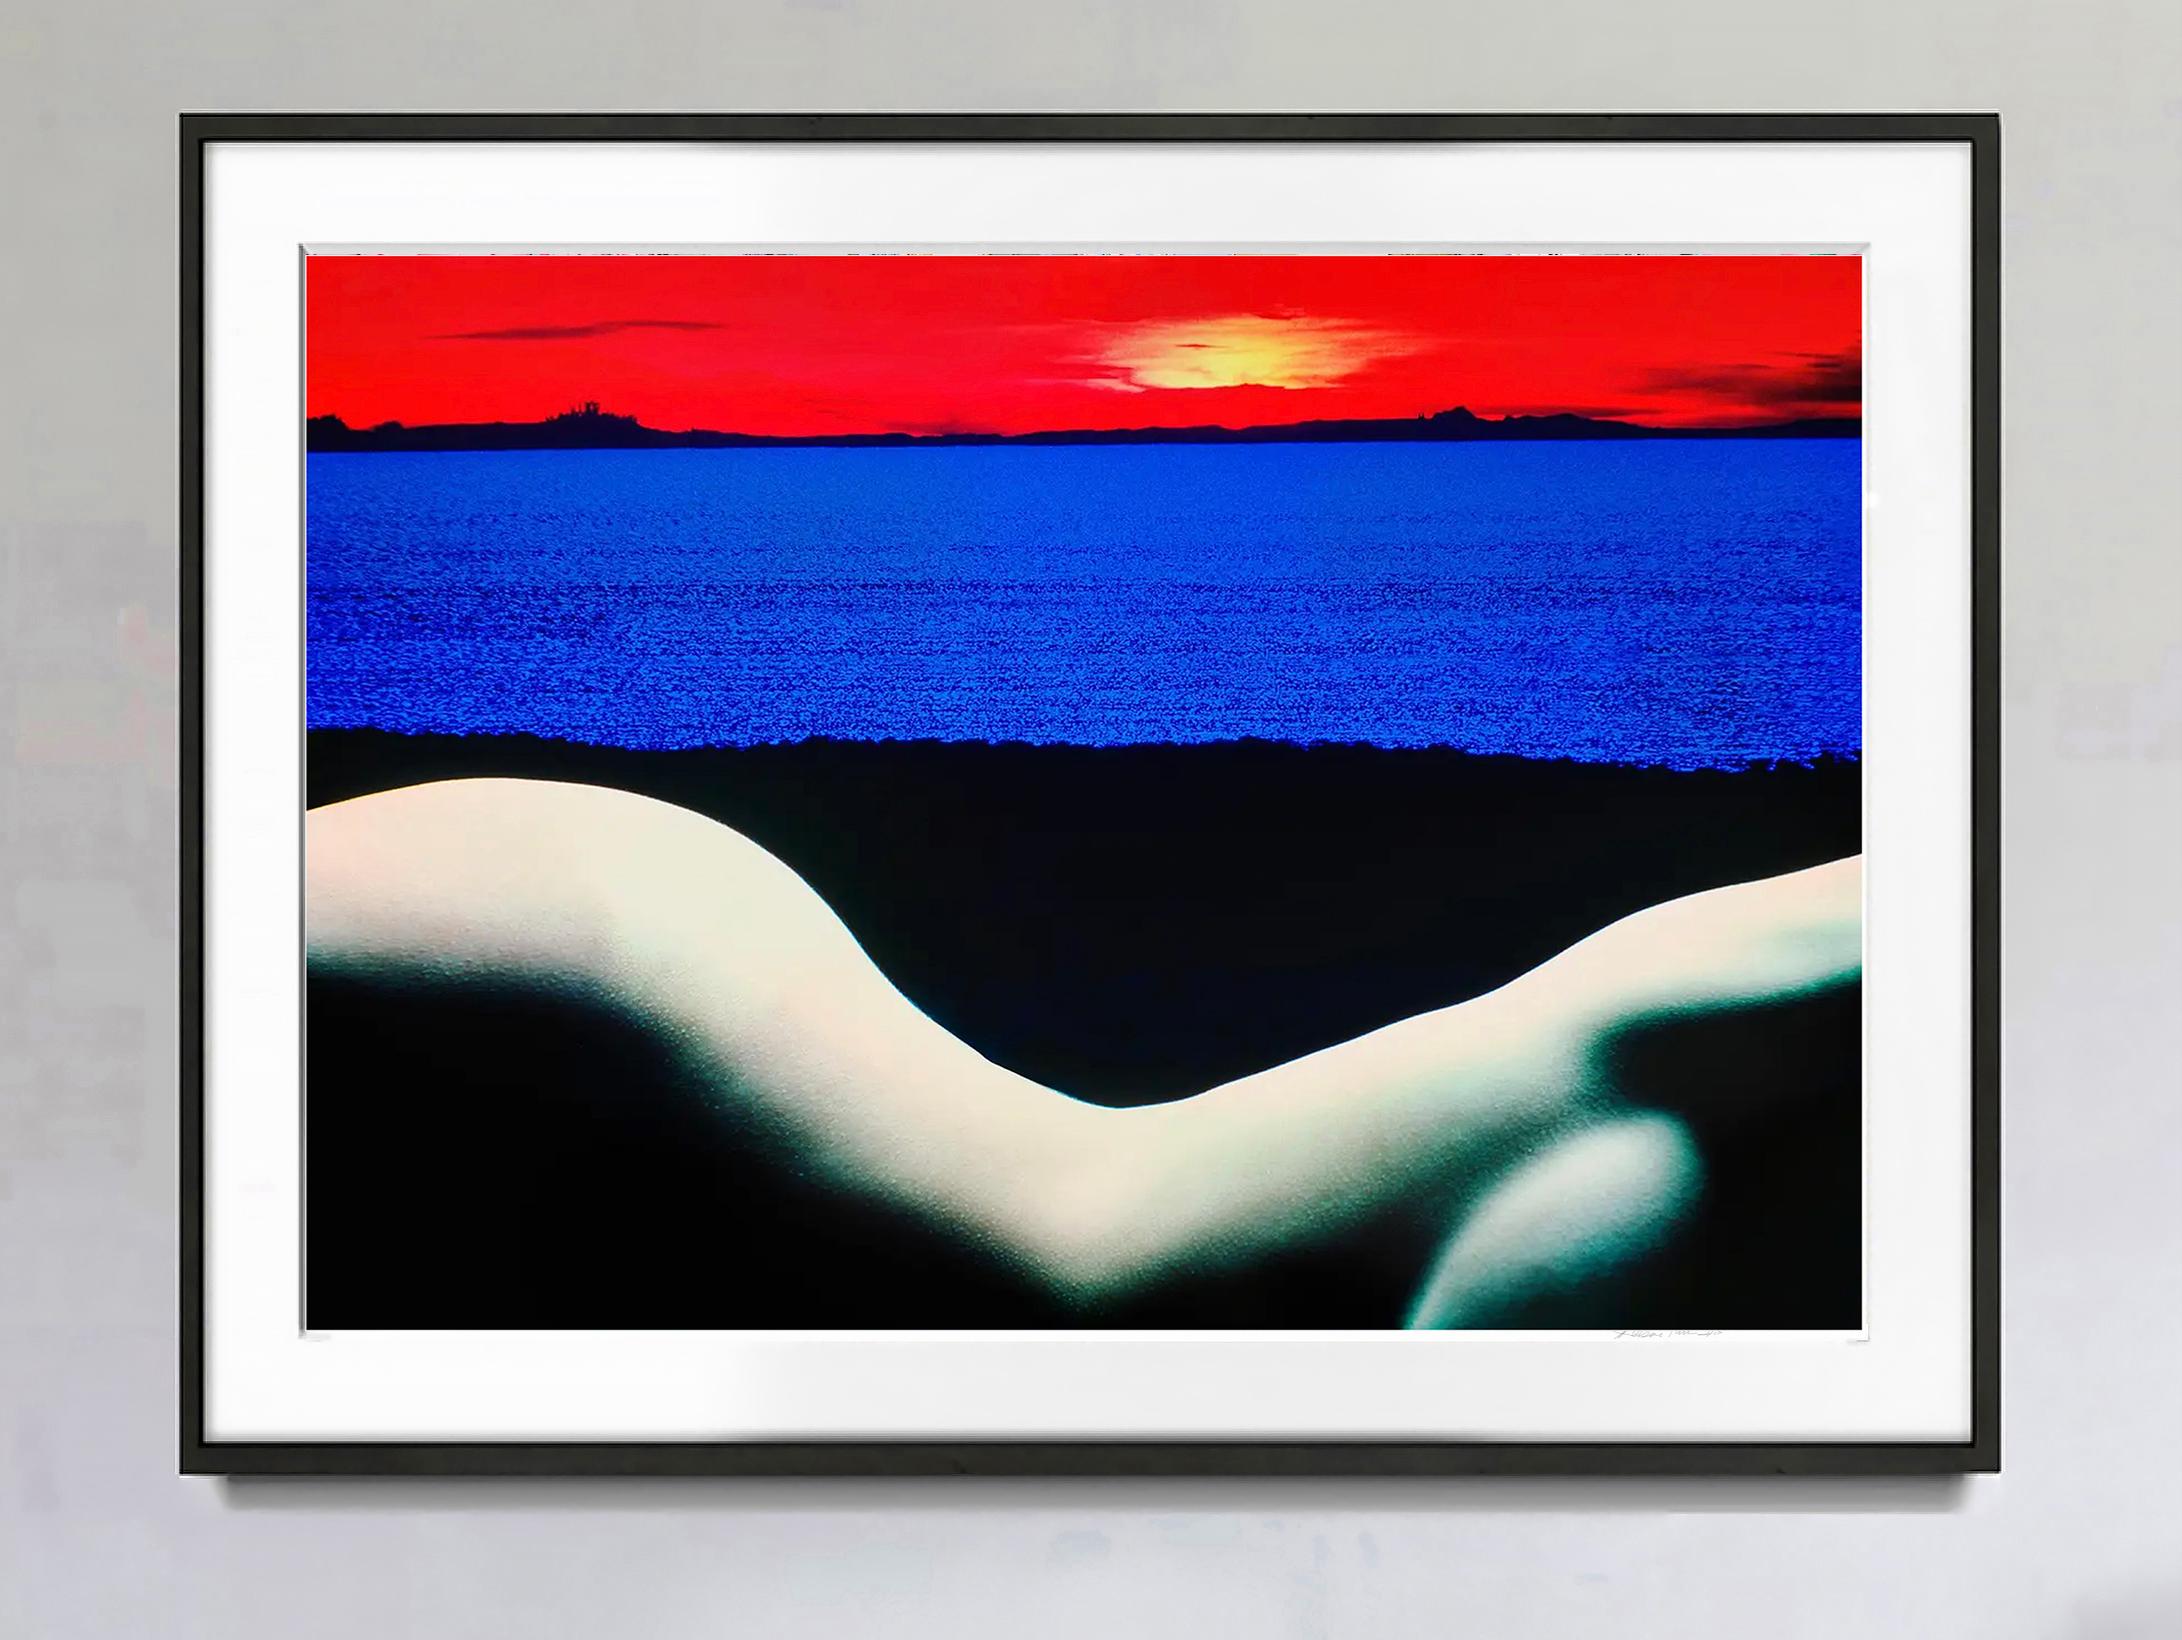 Curvy Nude in Surreal Landscape of Red and Blue - Album Cover - Surrealist Photograph by Mitchell Funk